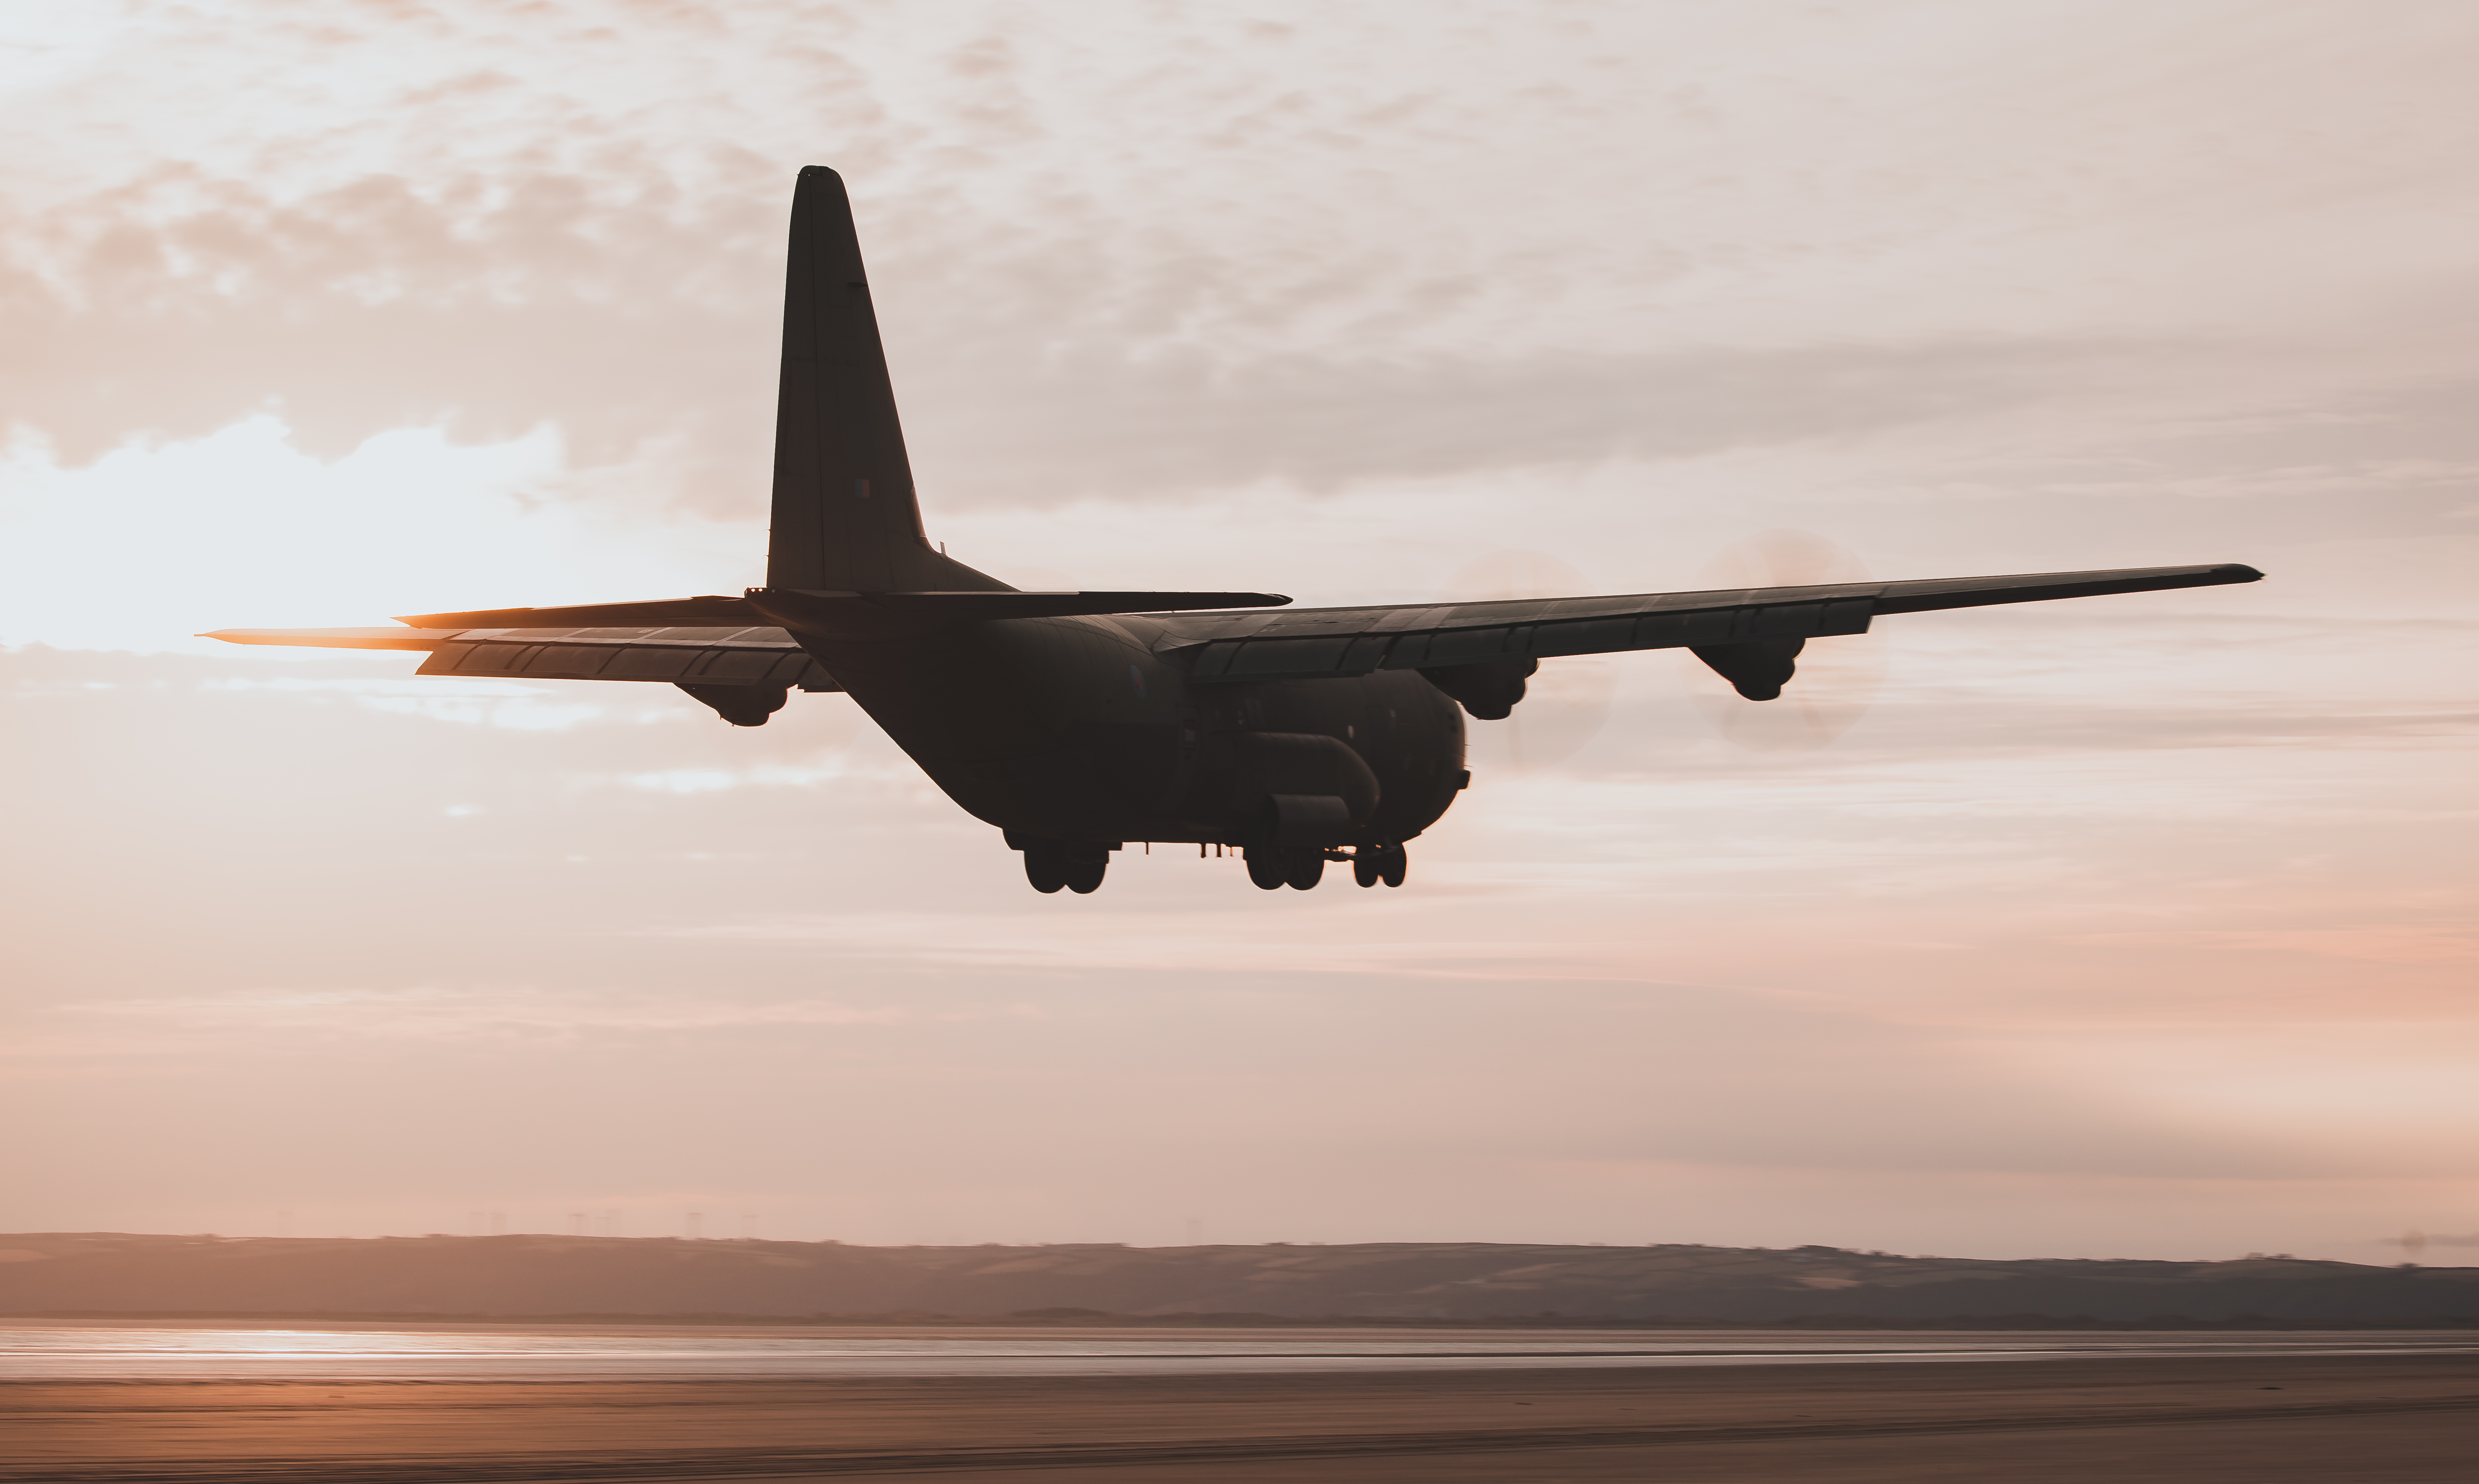 Image shows Hercules aircraft flying low.